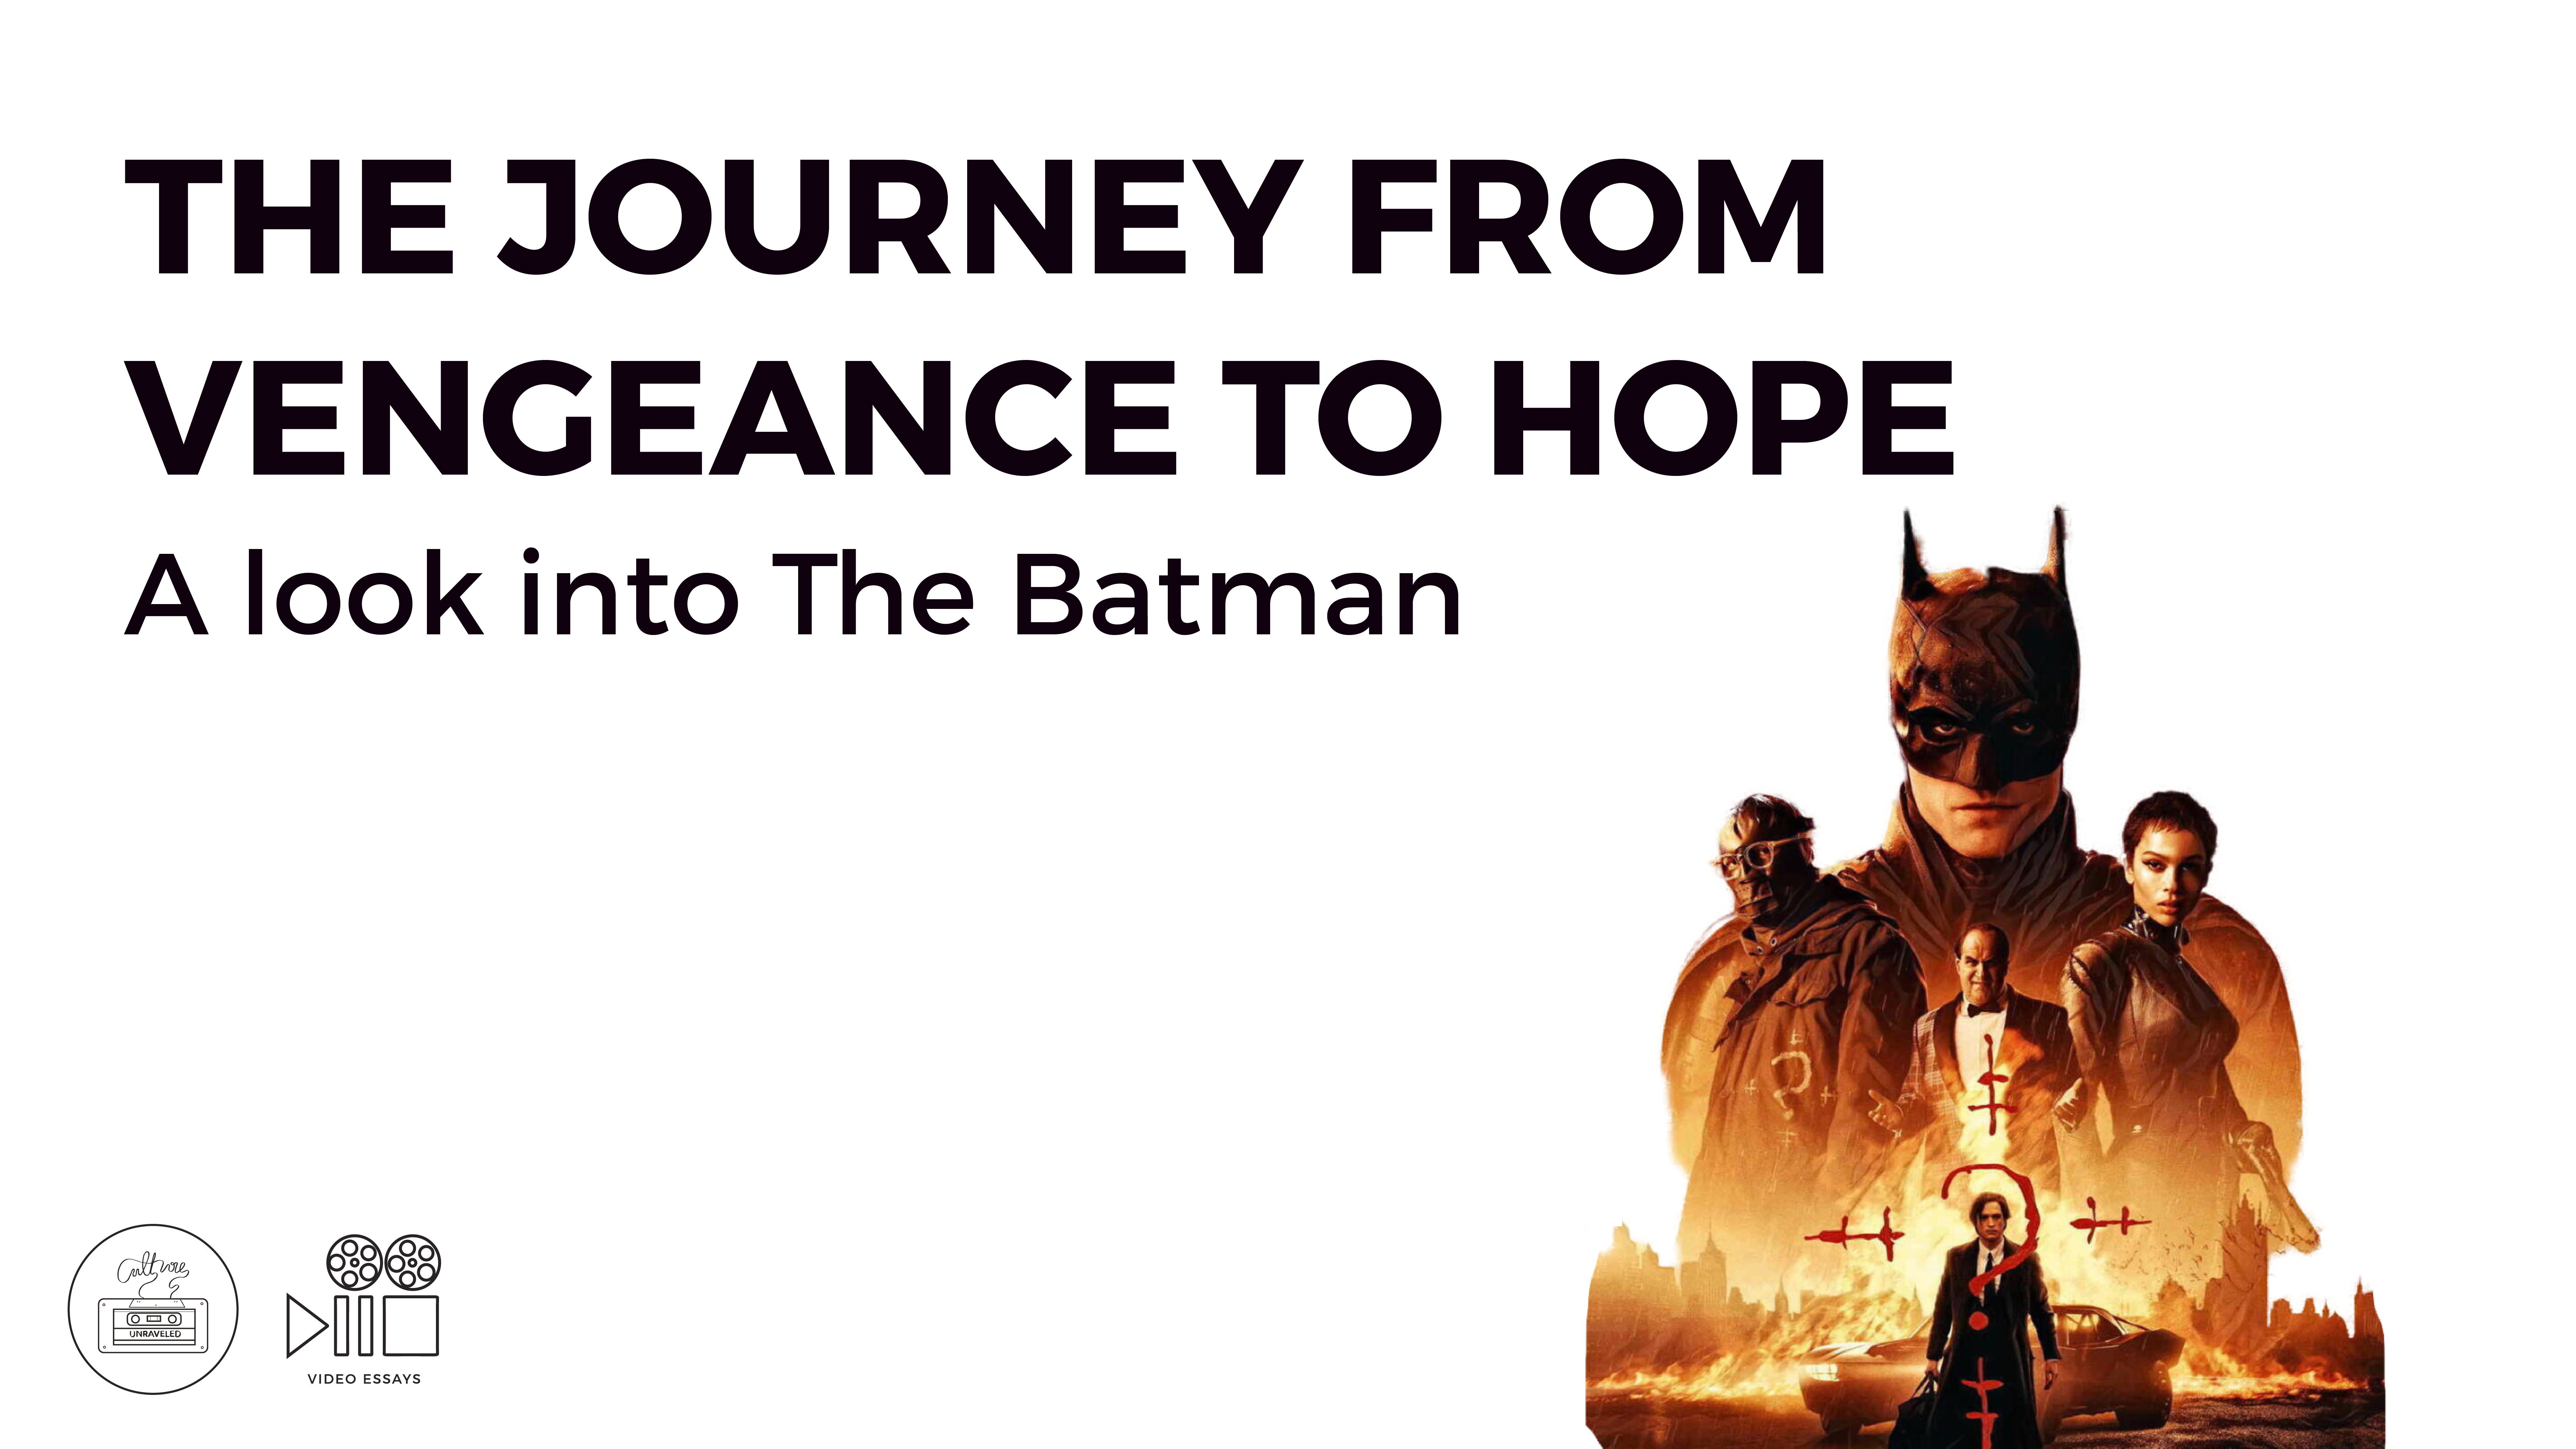 The Journey from Vengeance to Hope